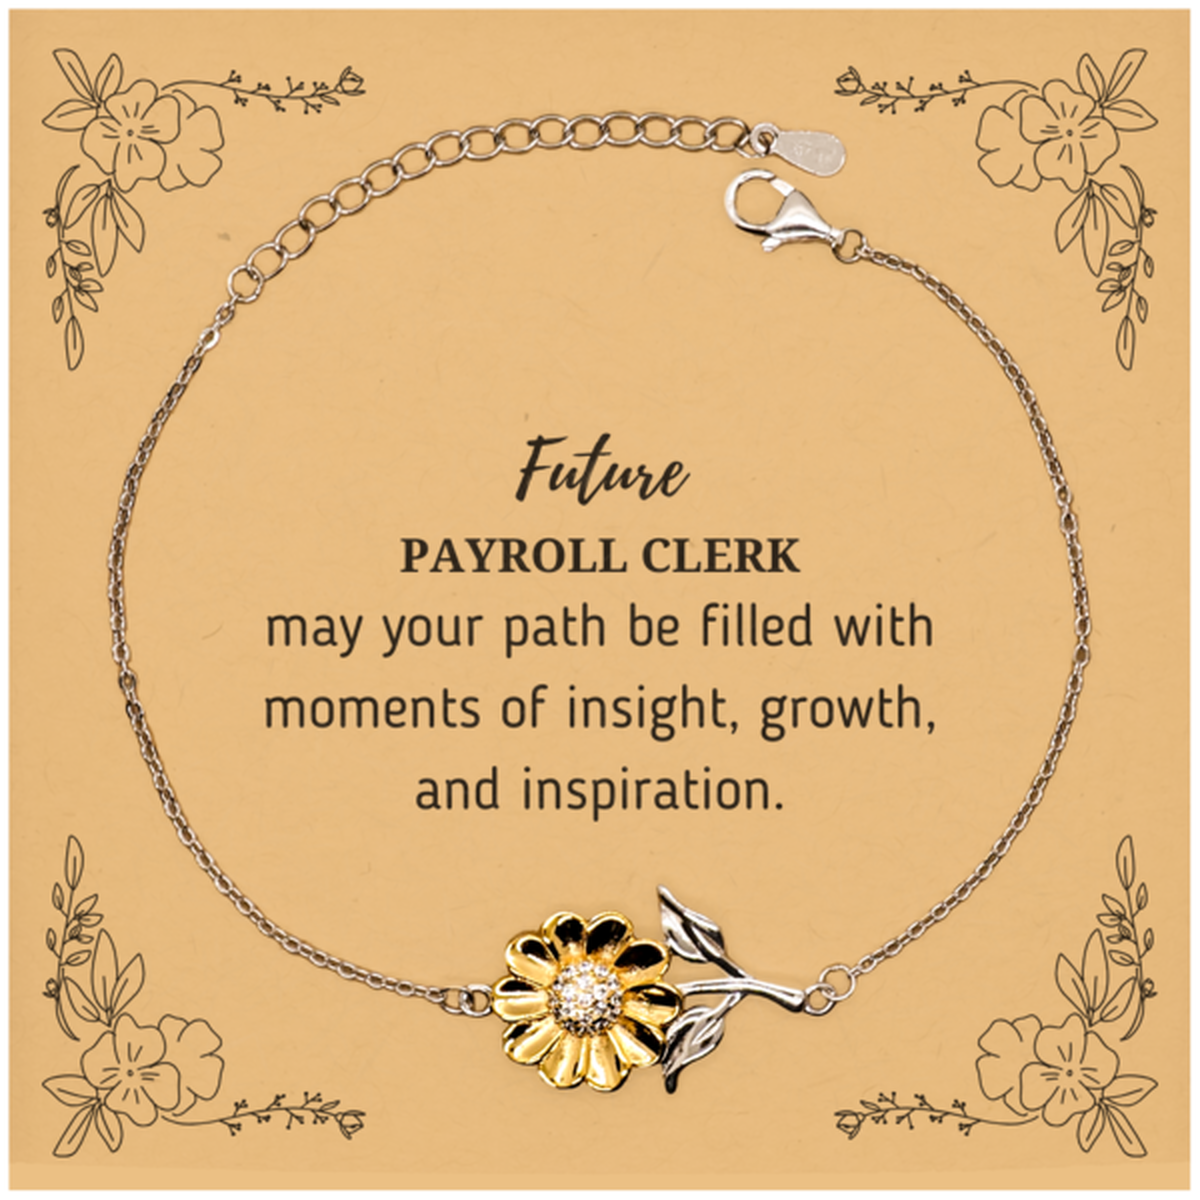 Future Payroll Clerk Gifts, May your path be filled with moments of insight, Graduation Gifts for New Payroll Clerk, Christmas Unique Sunflower Bracelet For Men, Women, Friends